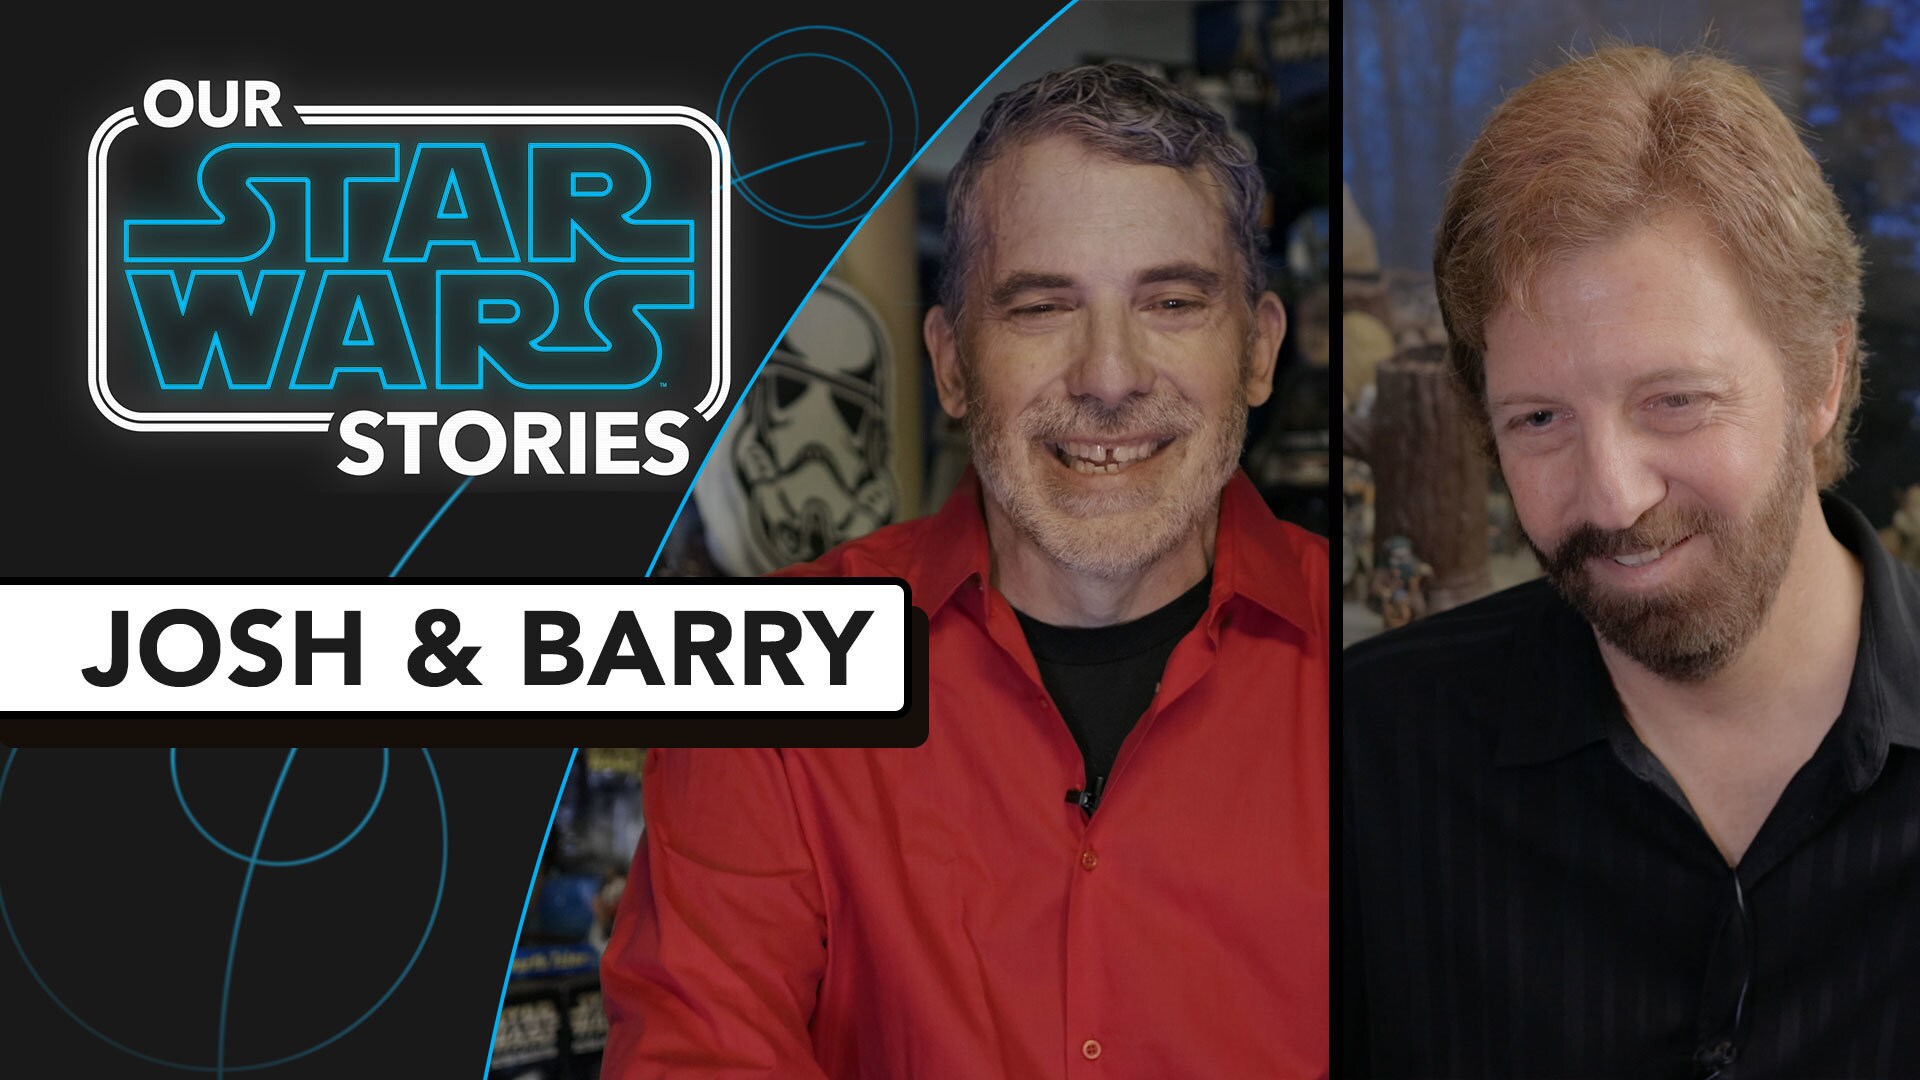 How Josh and Barry Made a Life-Changing Star Wars Connection | Our Star Wars Stories